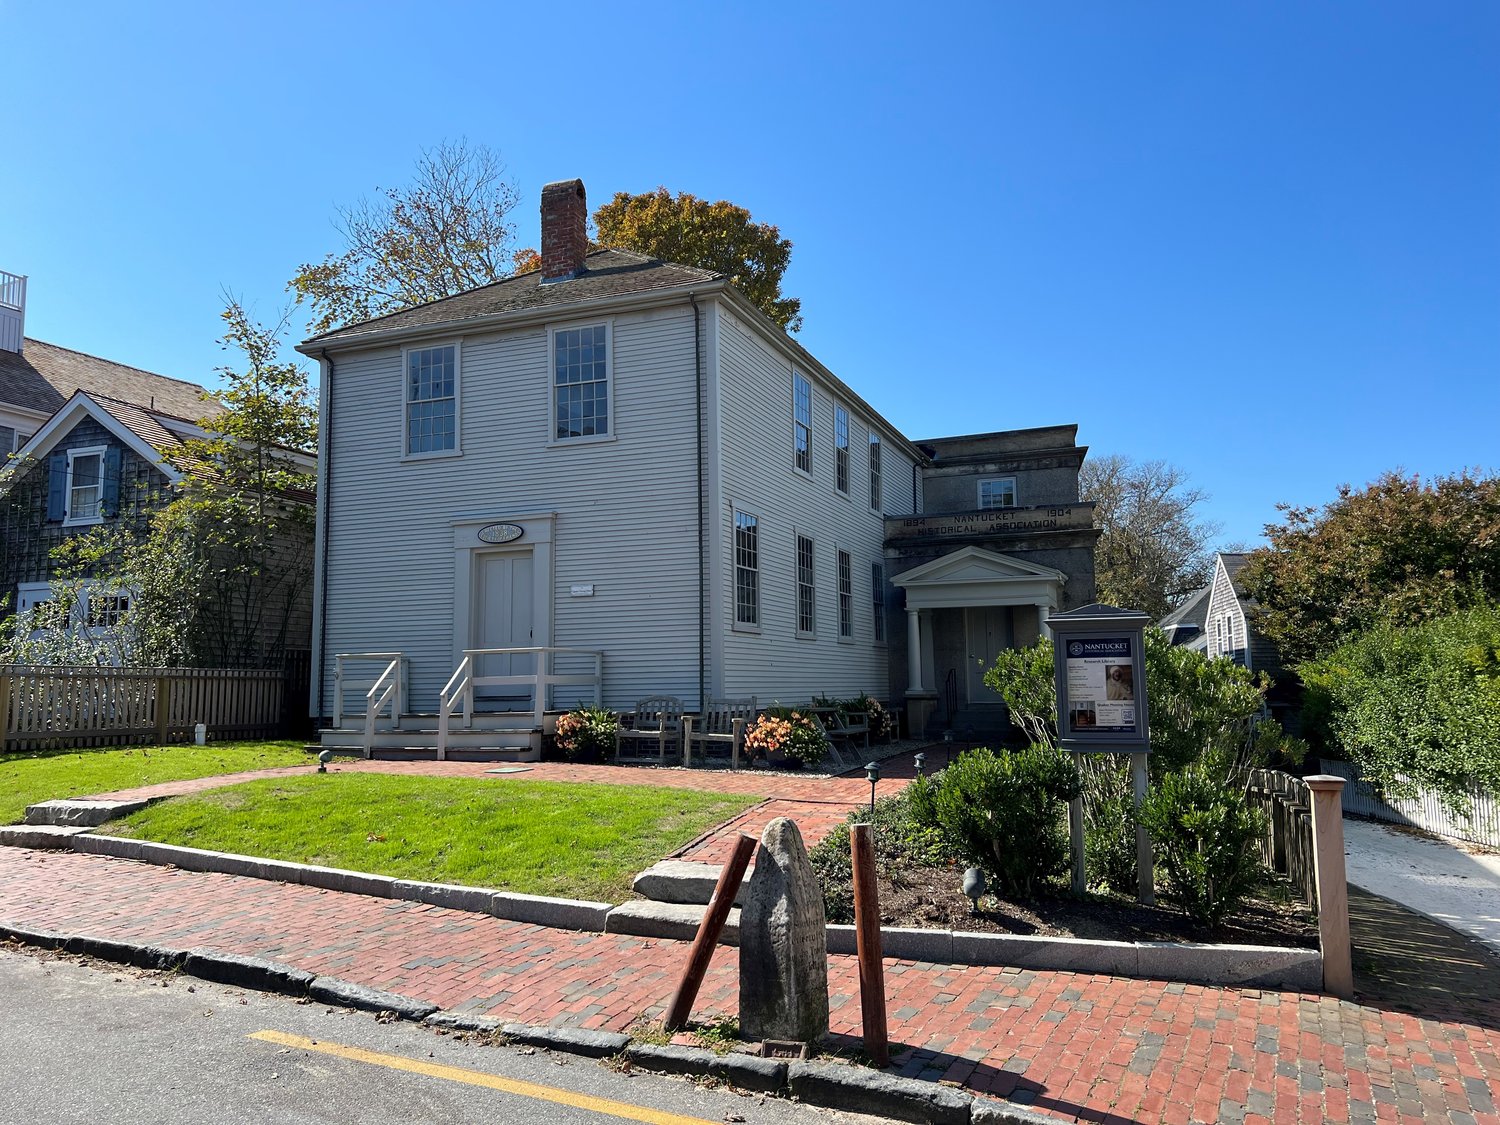 The Nantucket Historical Association's research library and Friends Meeting House last October.